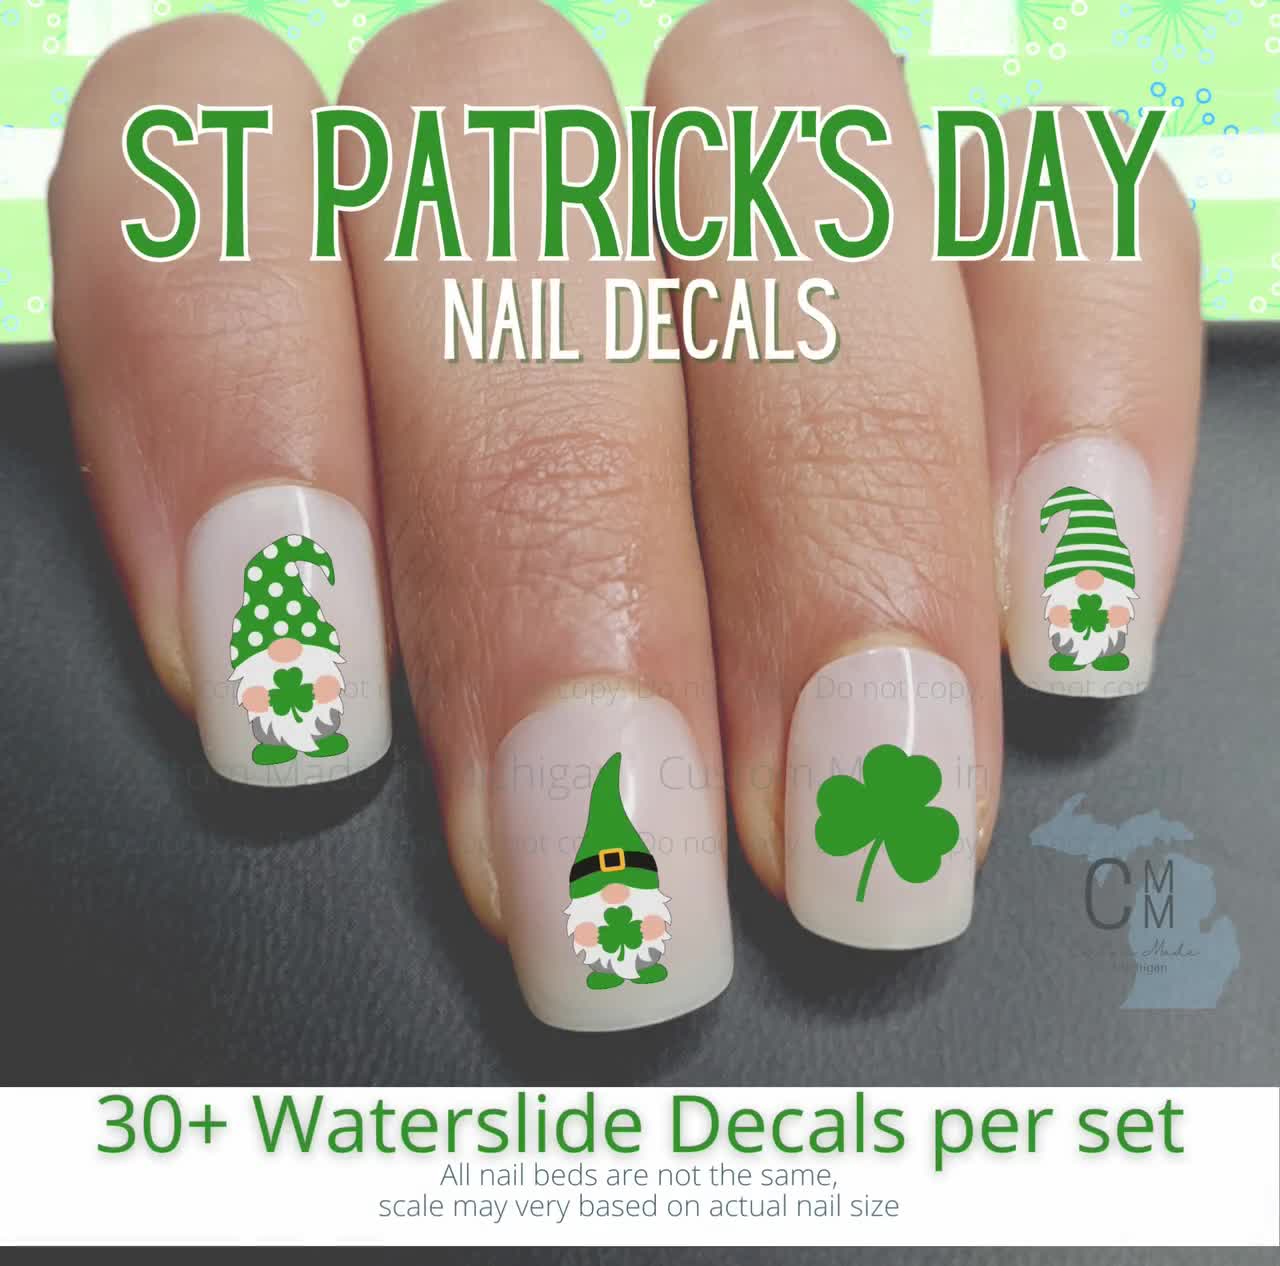 Watercolor Leaves Leaf Nail Stickers Decals Tree Leaves Ginkgo